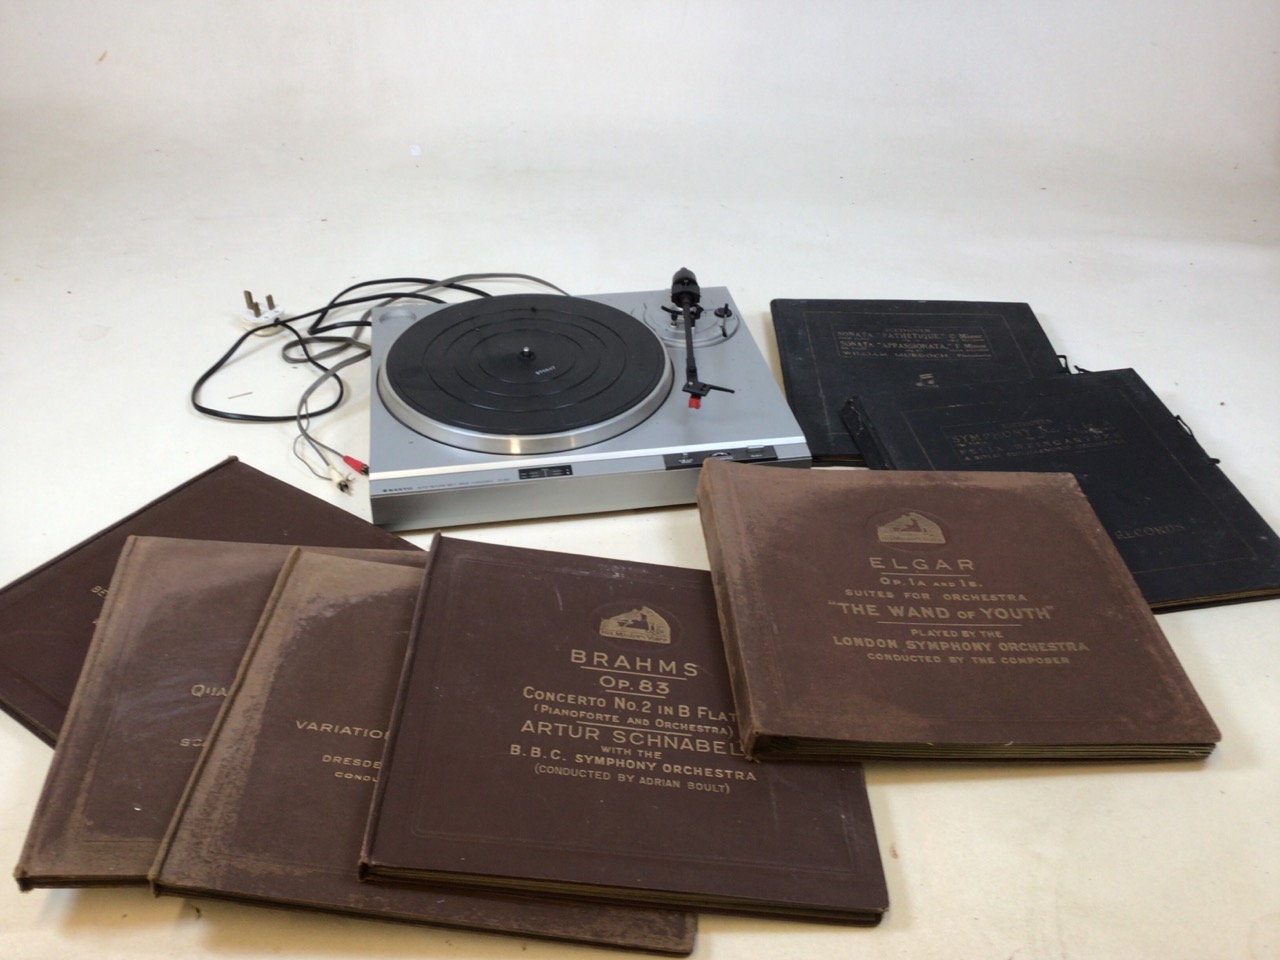 A Sanyo turntable TP 250 together with 7 boxed sets of 78s classical records